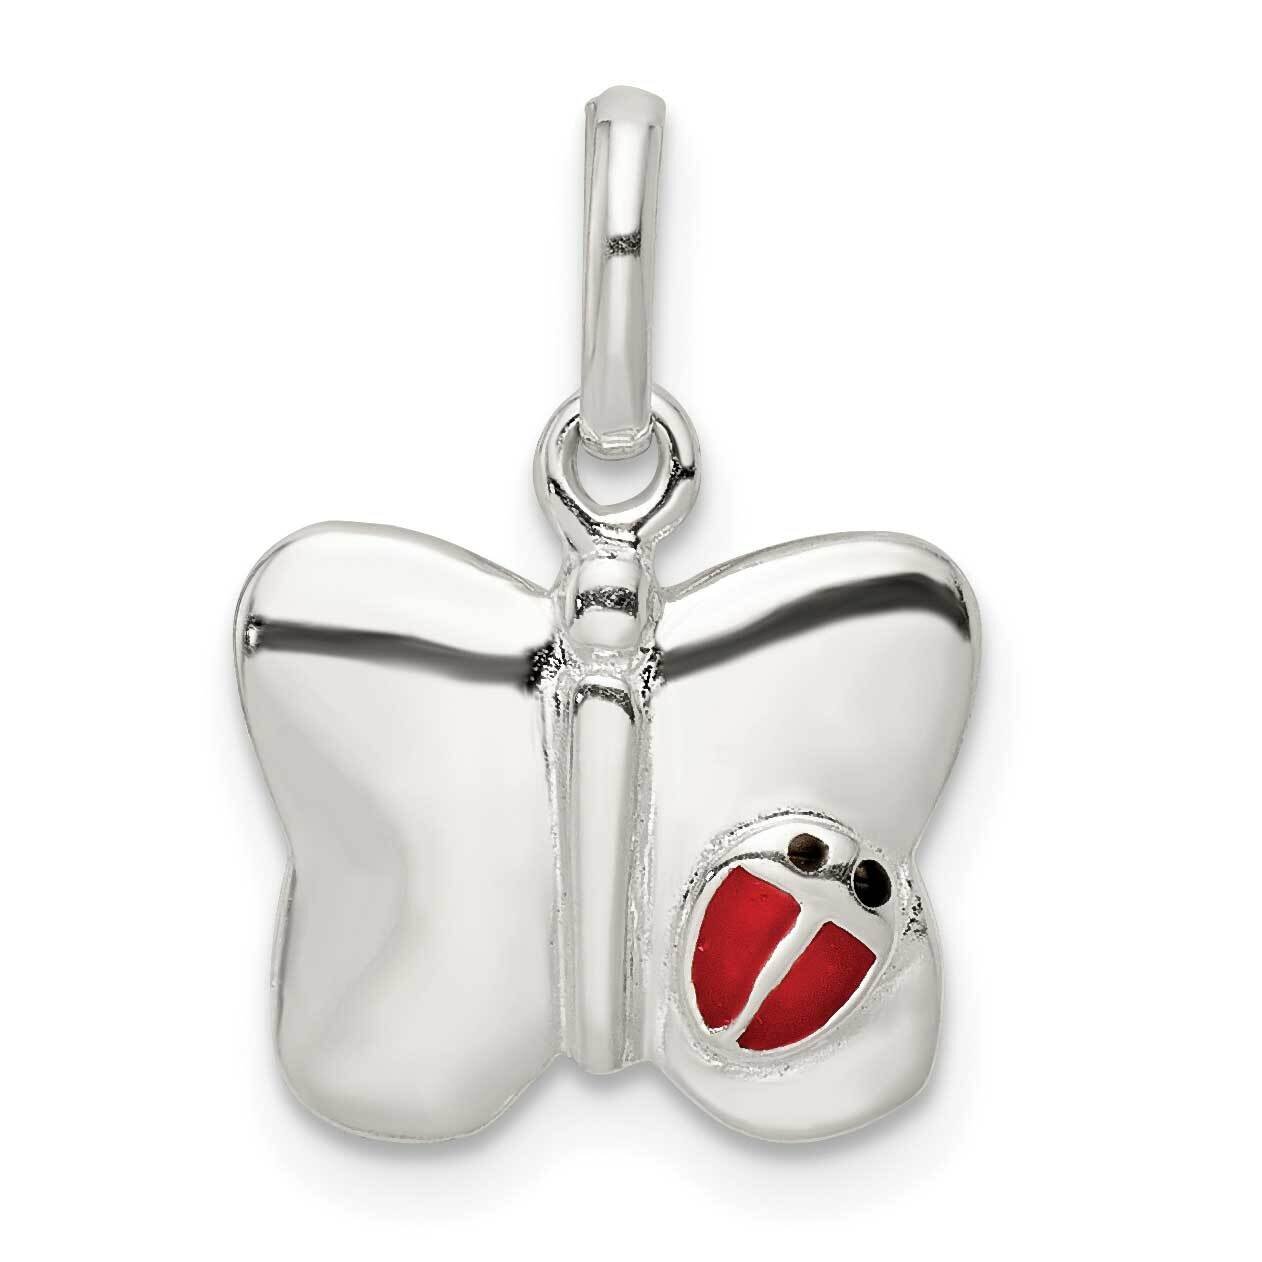 Enameled Butterfly with Ladybug Pendant Sterling Silver Polished QC11017